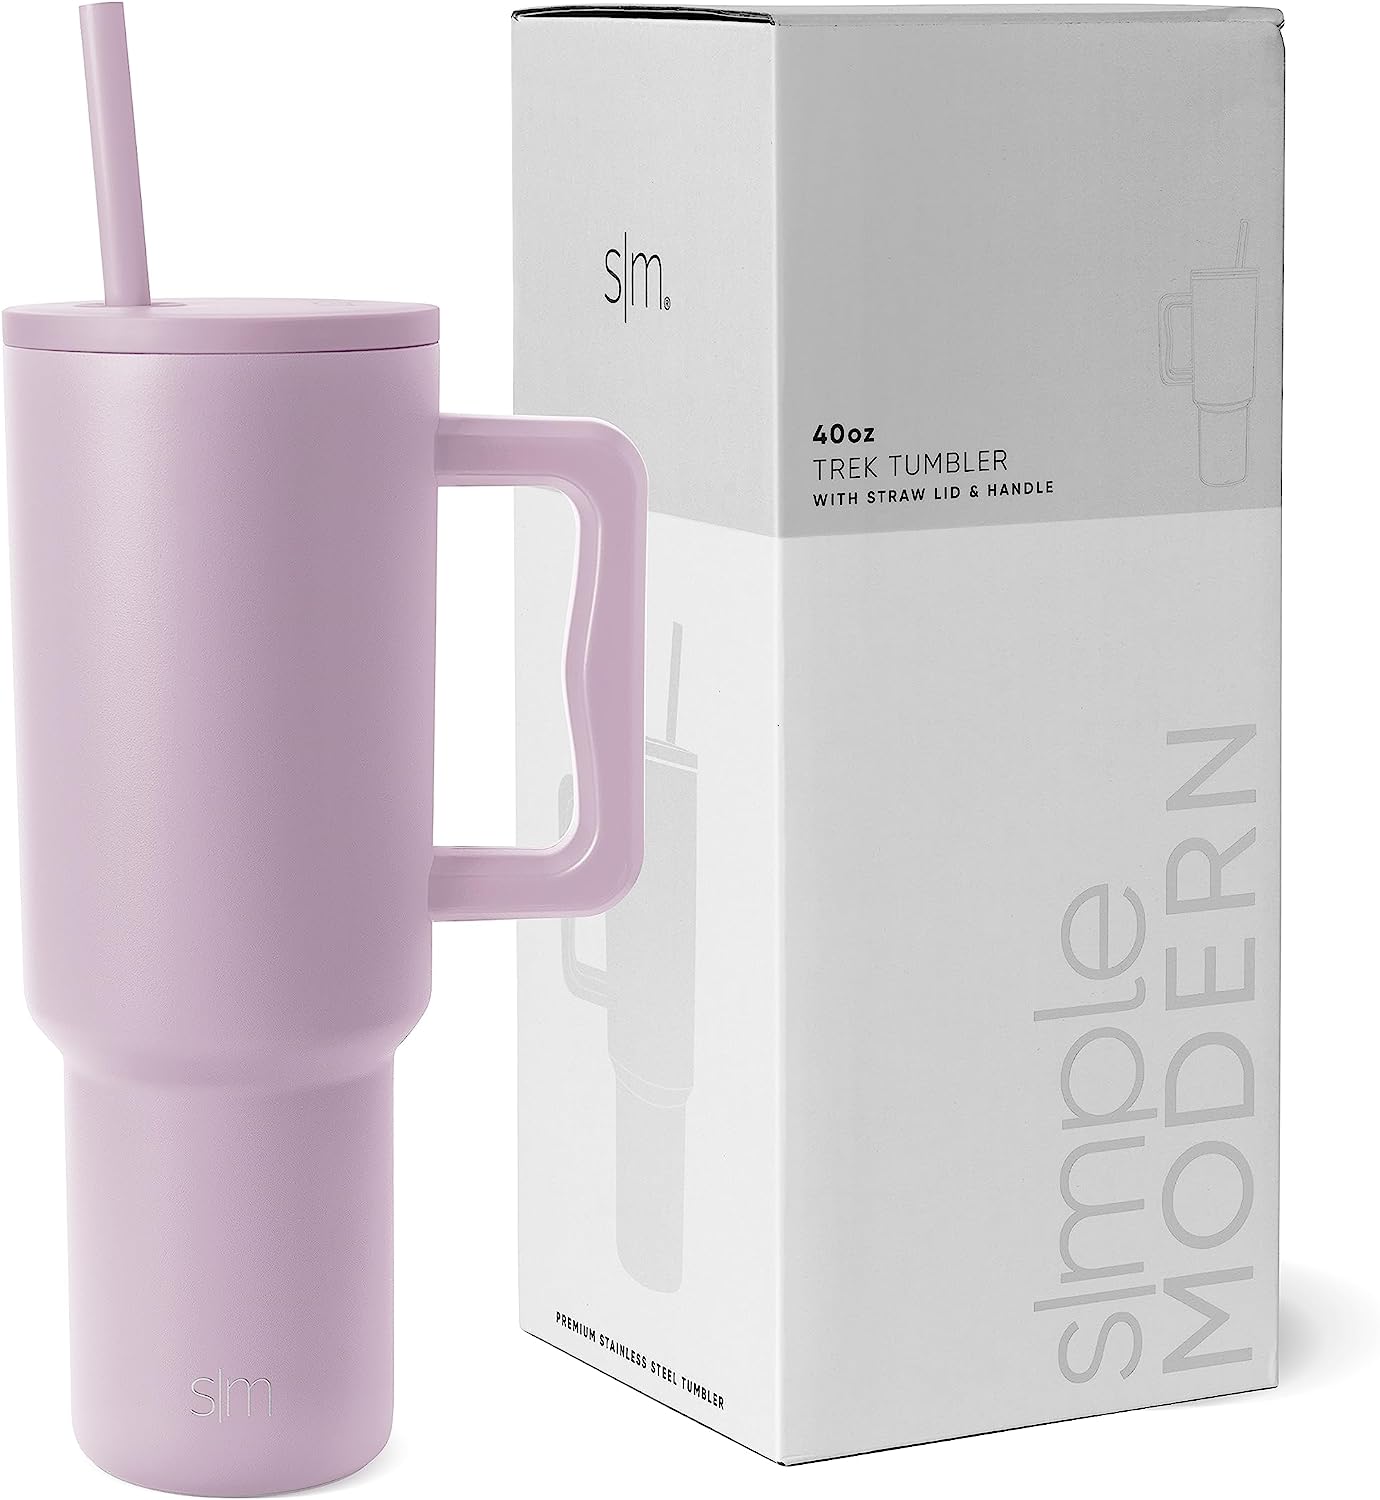 Meoky 40oz Tumbler with Handle, Leak-proof Lid and Straw, Insulated Lilac